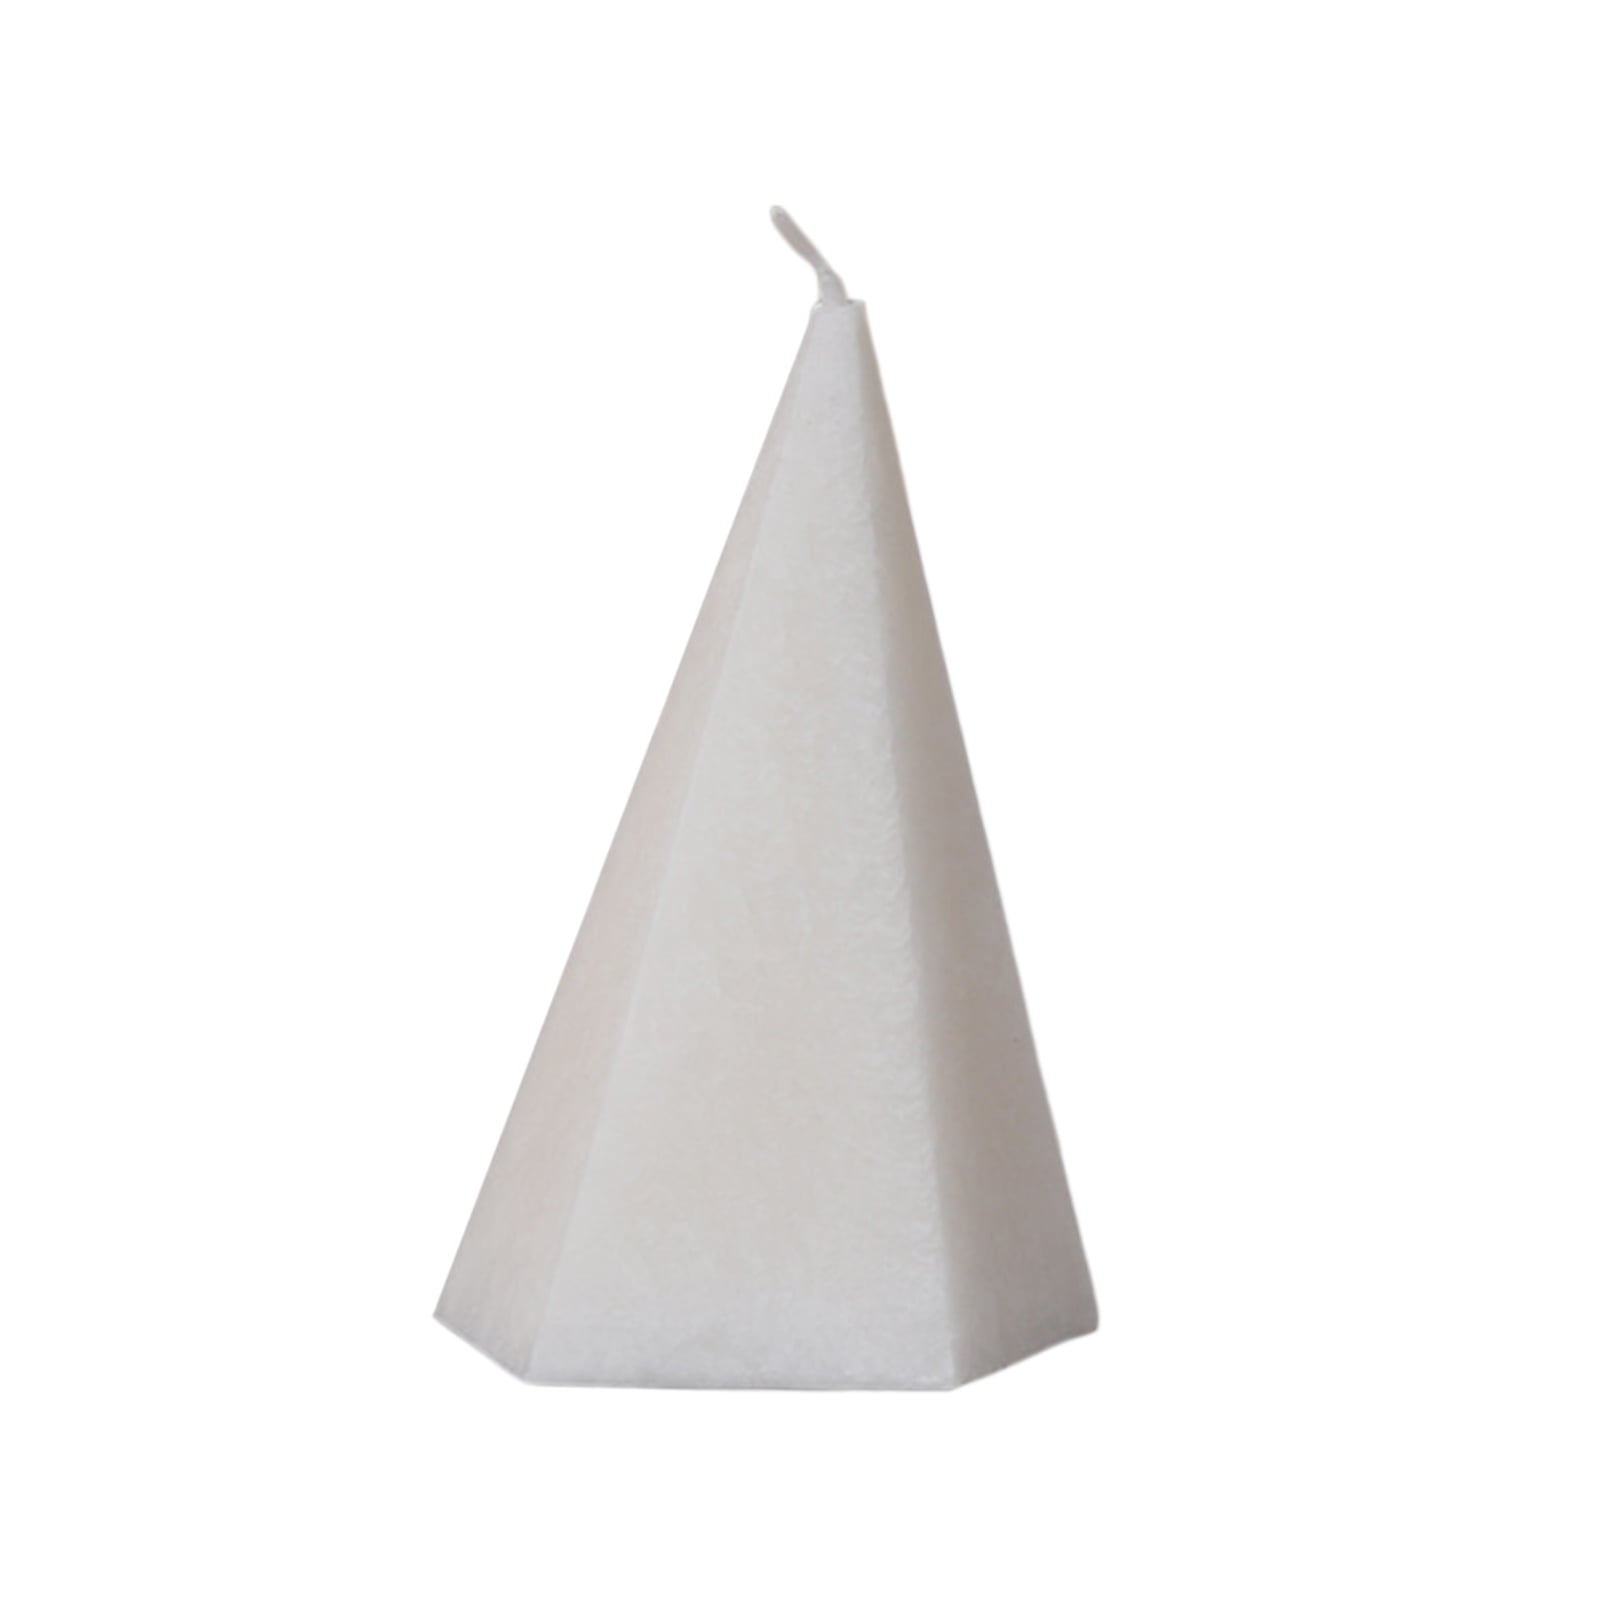 Biedermann & Sons 4-Inch Pyramid Candles Red Box of 12